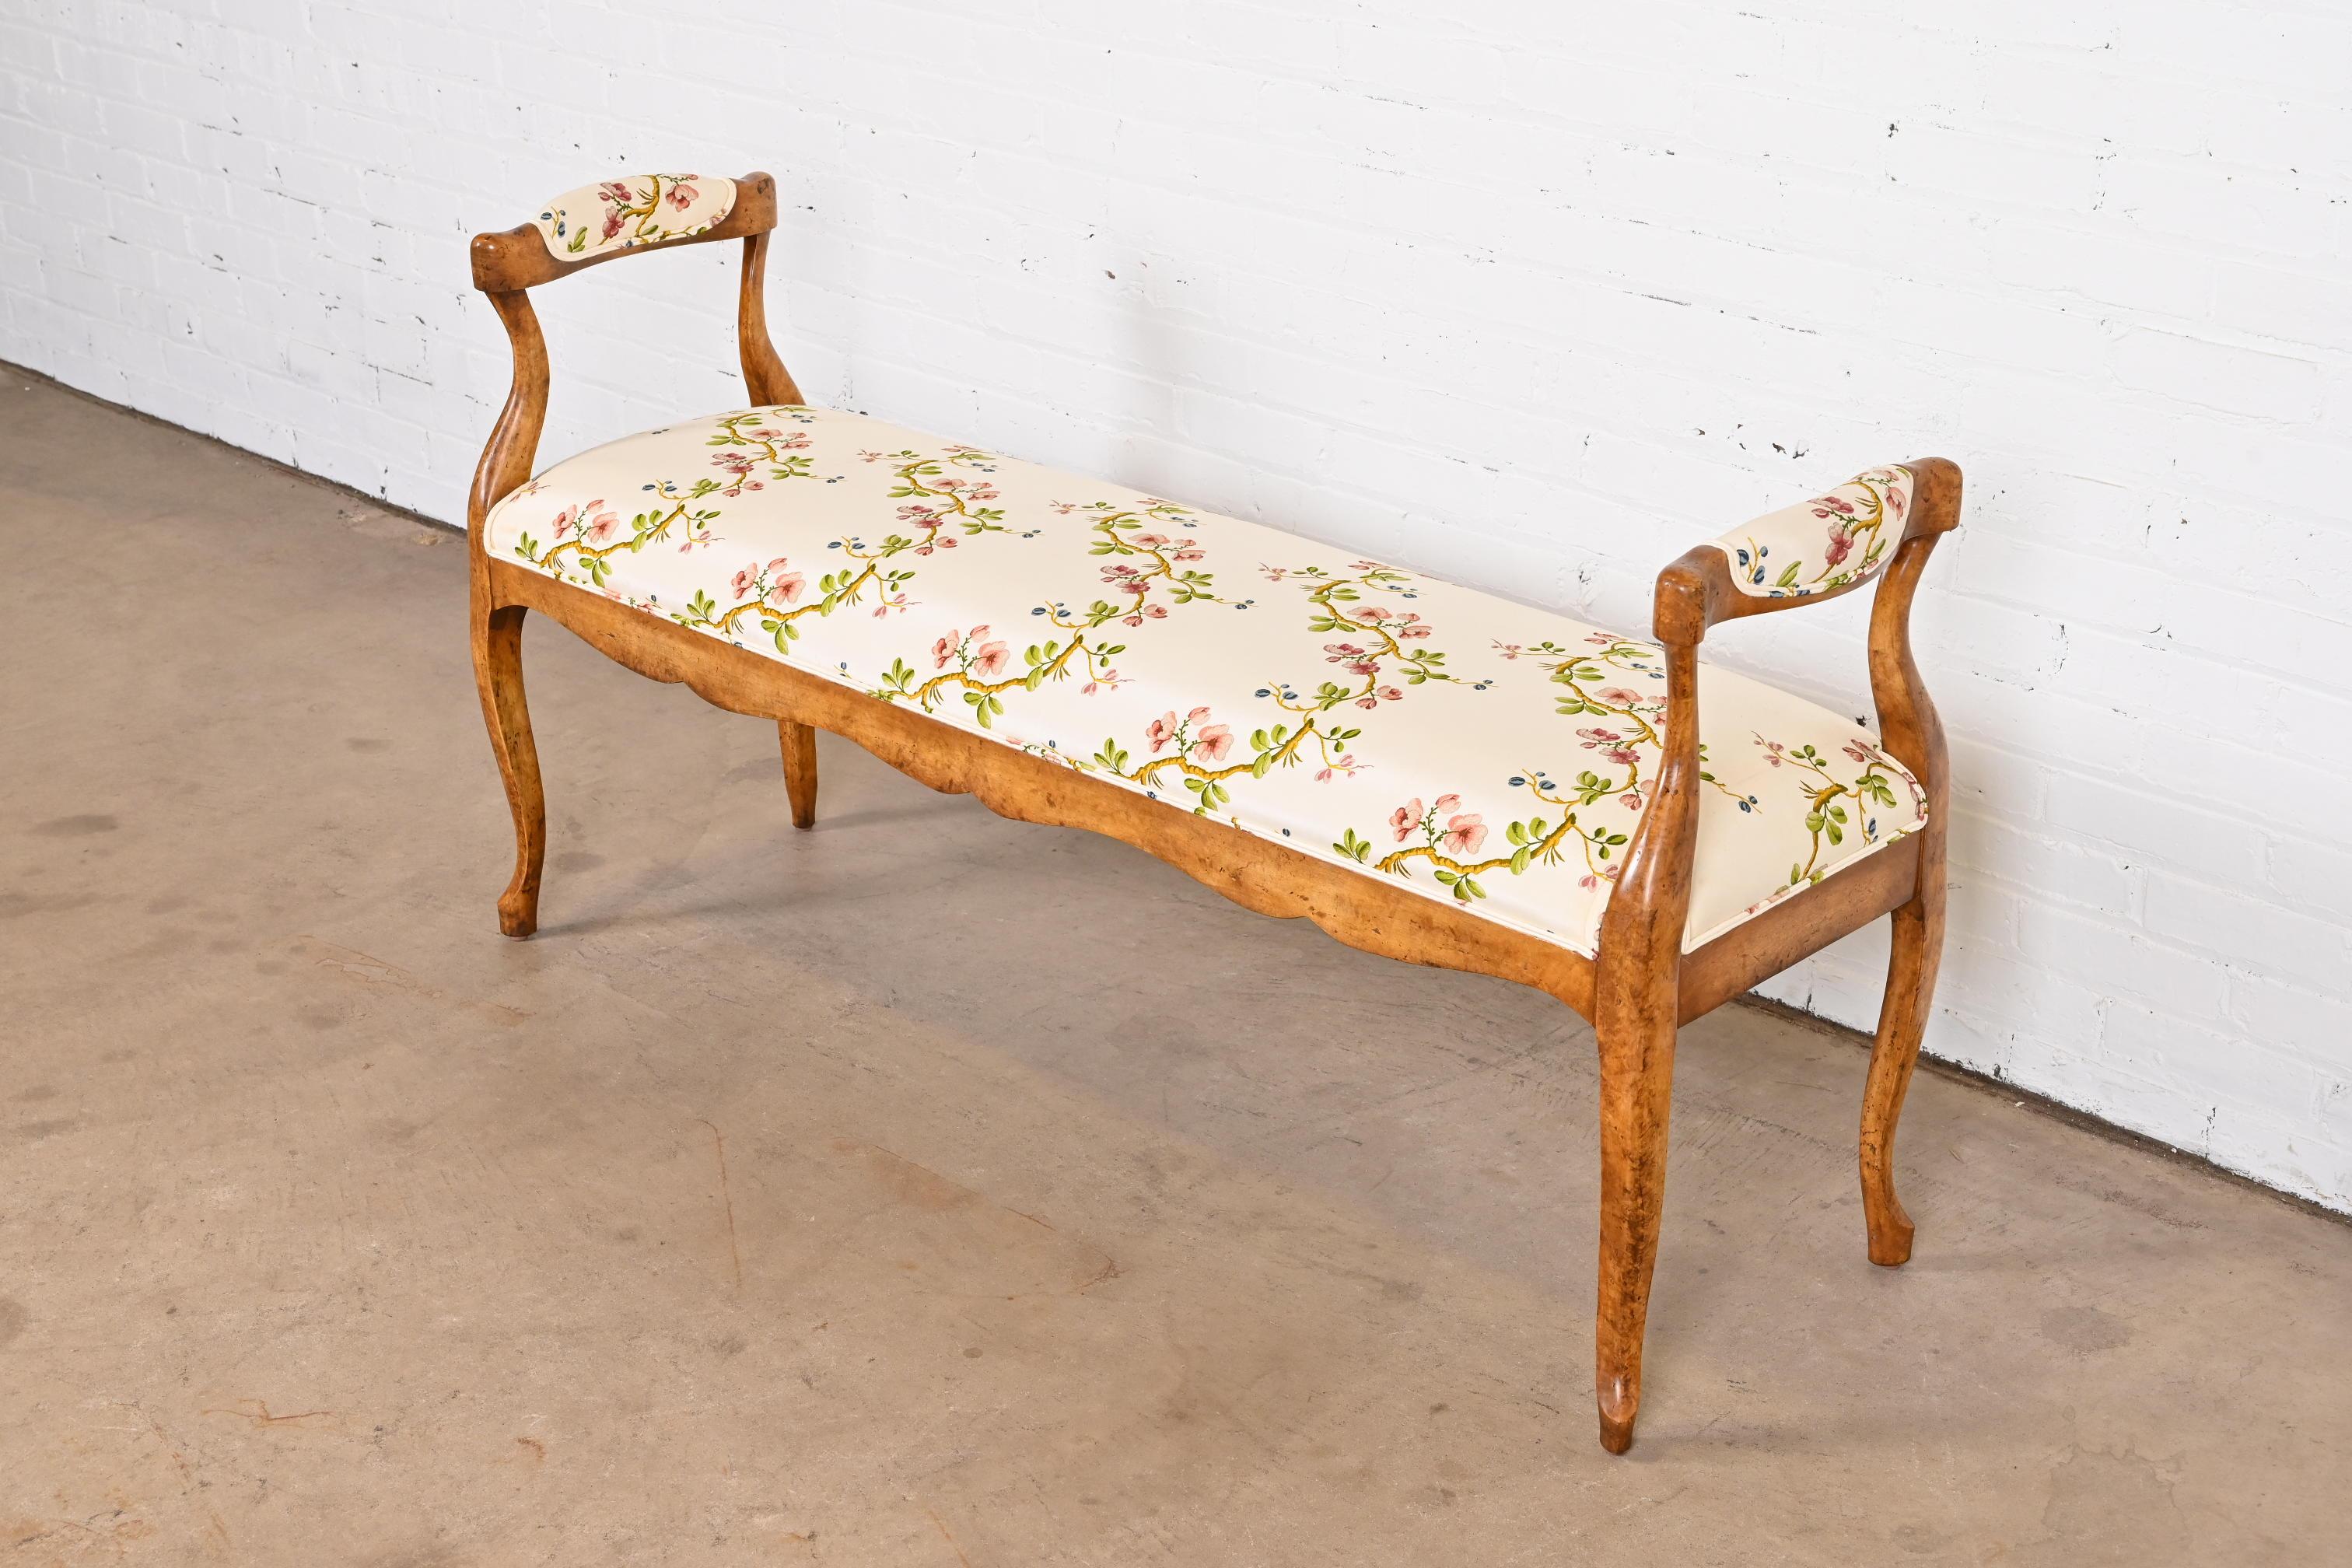 A gorgeous French Provincial style upholstered window bench or bed bench

By Minton Spidell, 20th century

Maple frame and cabriole legs, with a floral and ivory upholstery.

Measures: 58.5